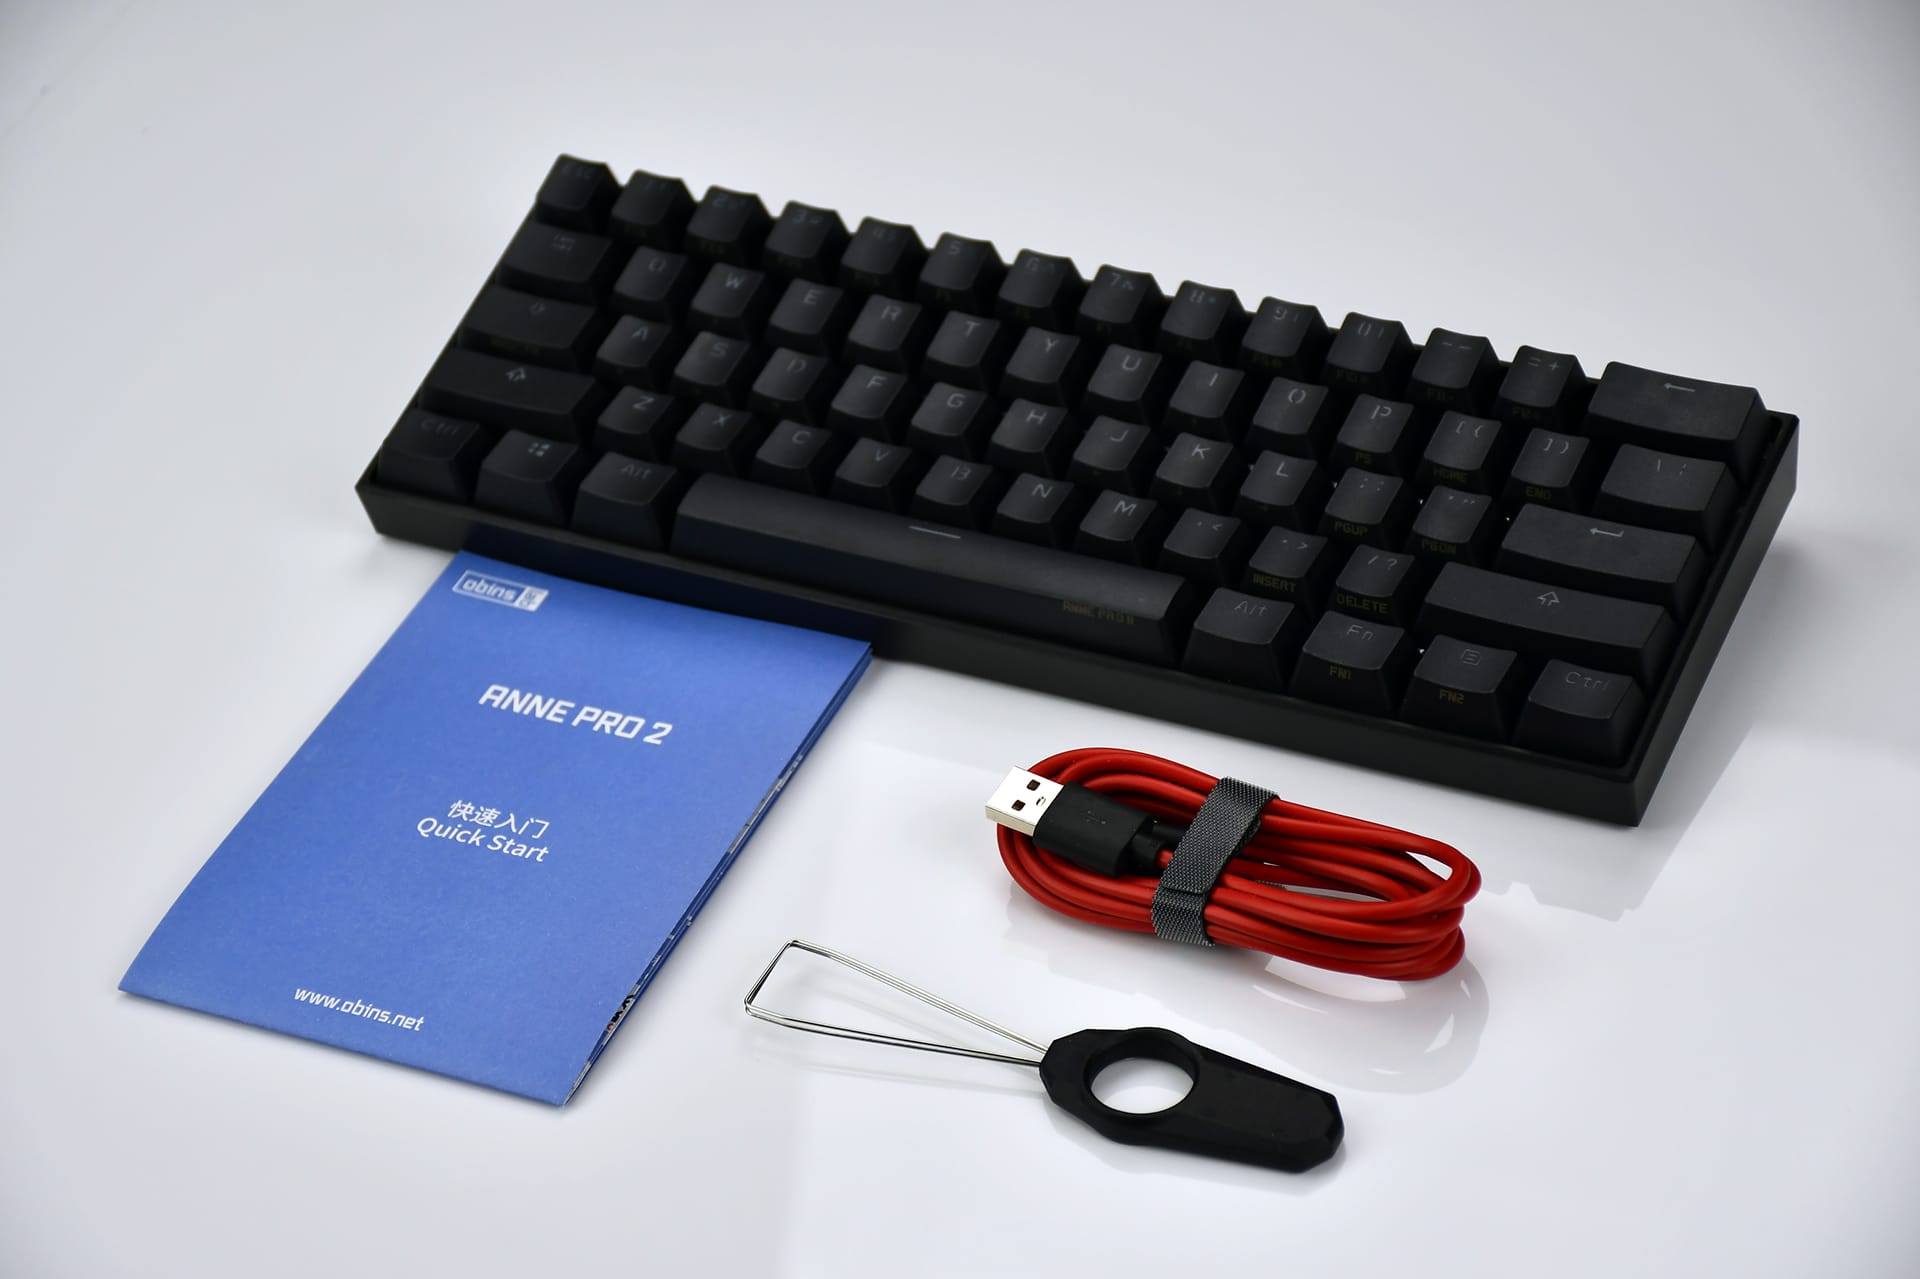 Anne Pro 2 RGB Bluetooth Keyboard with New Retooled Kailh ...
